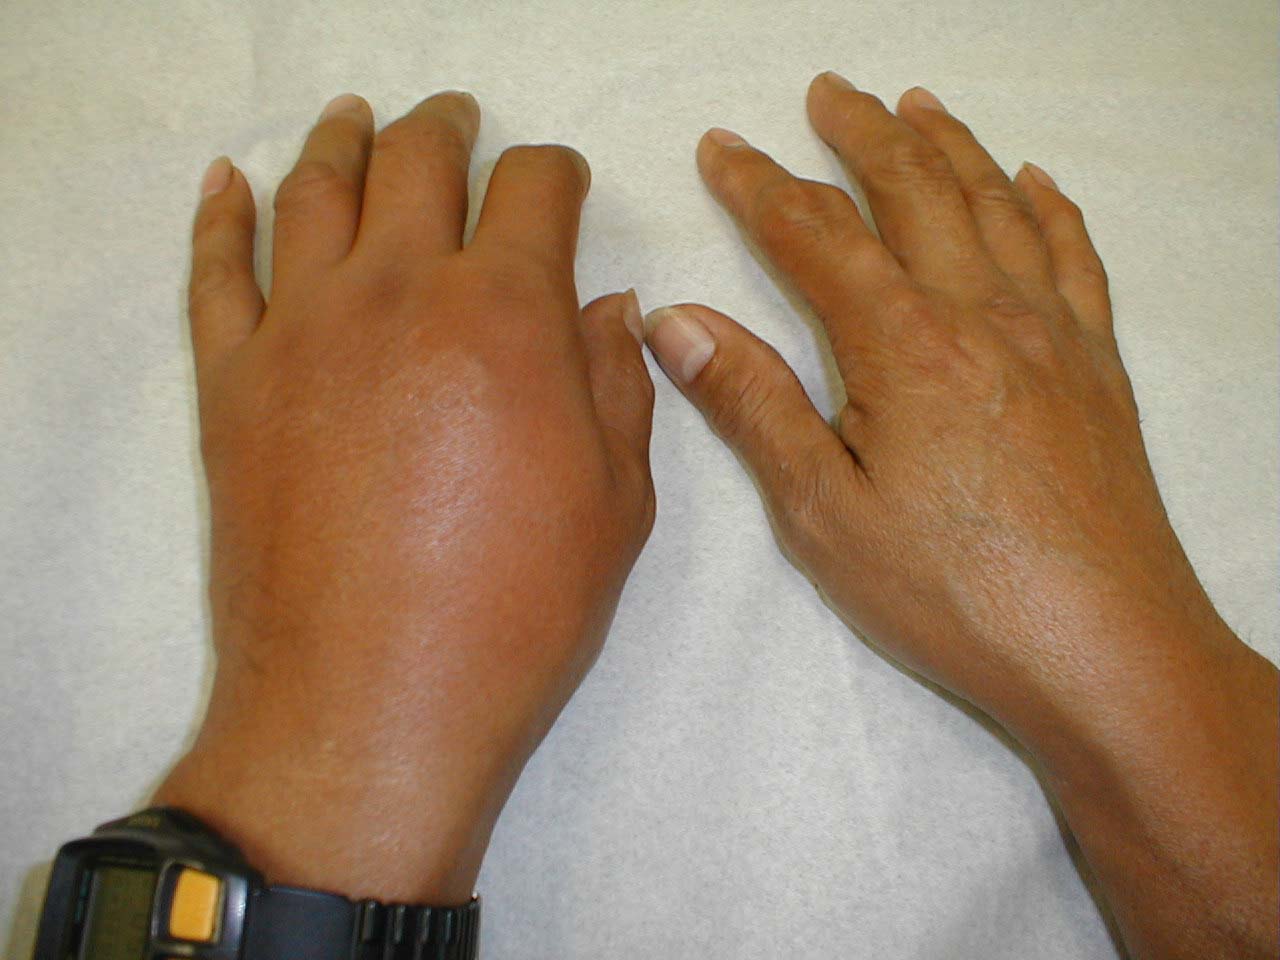 Gout of Left MCP Joints: Diffuse redness and swelling over MCP joints caused by inflammation induced by gout. Right hand is normal, for comparison.